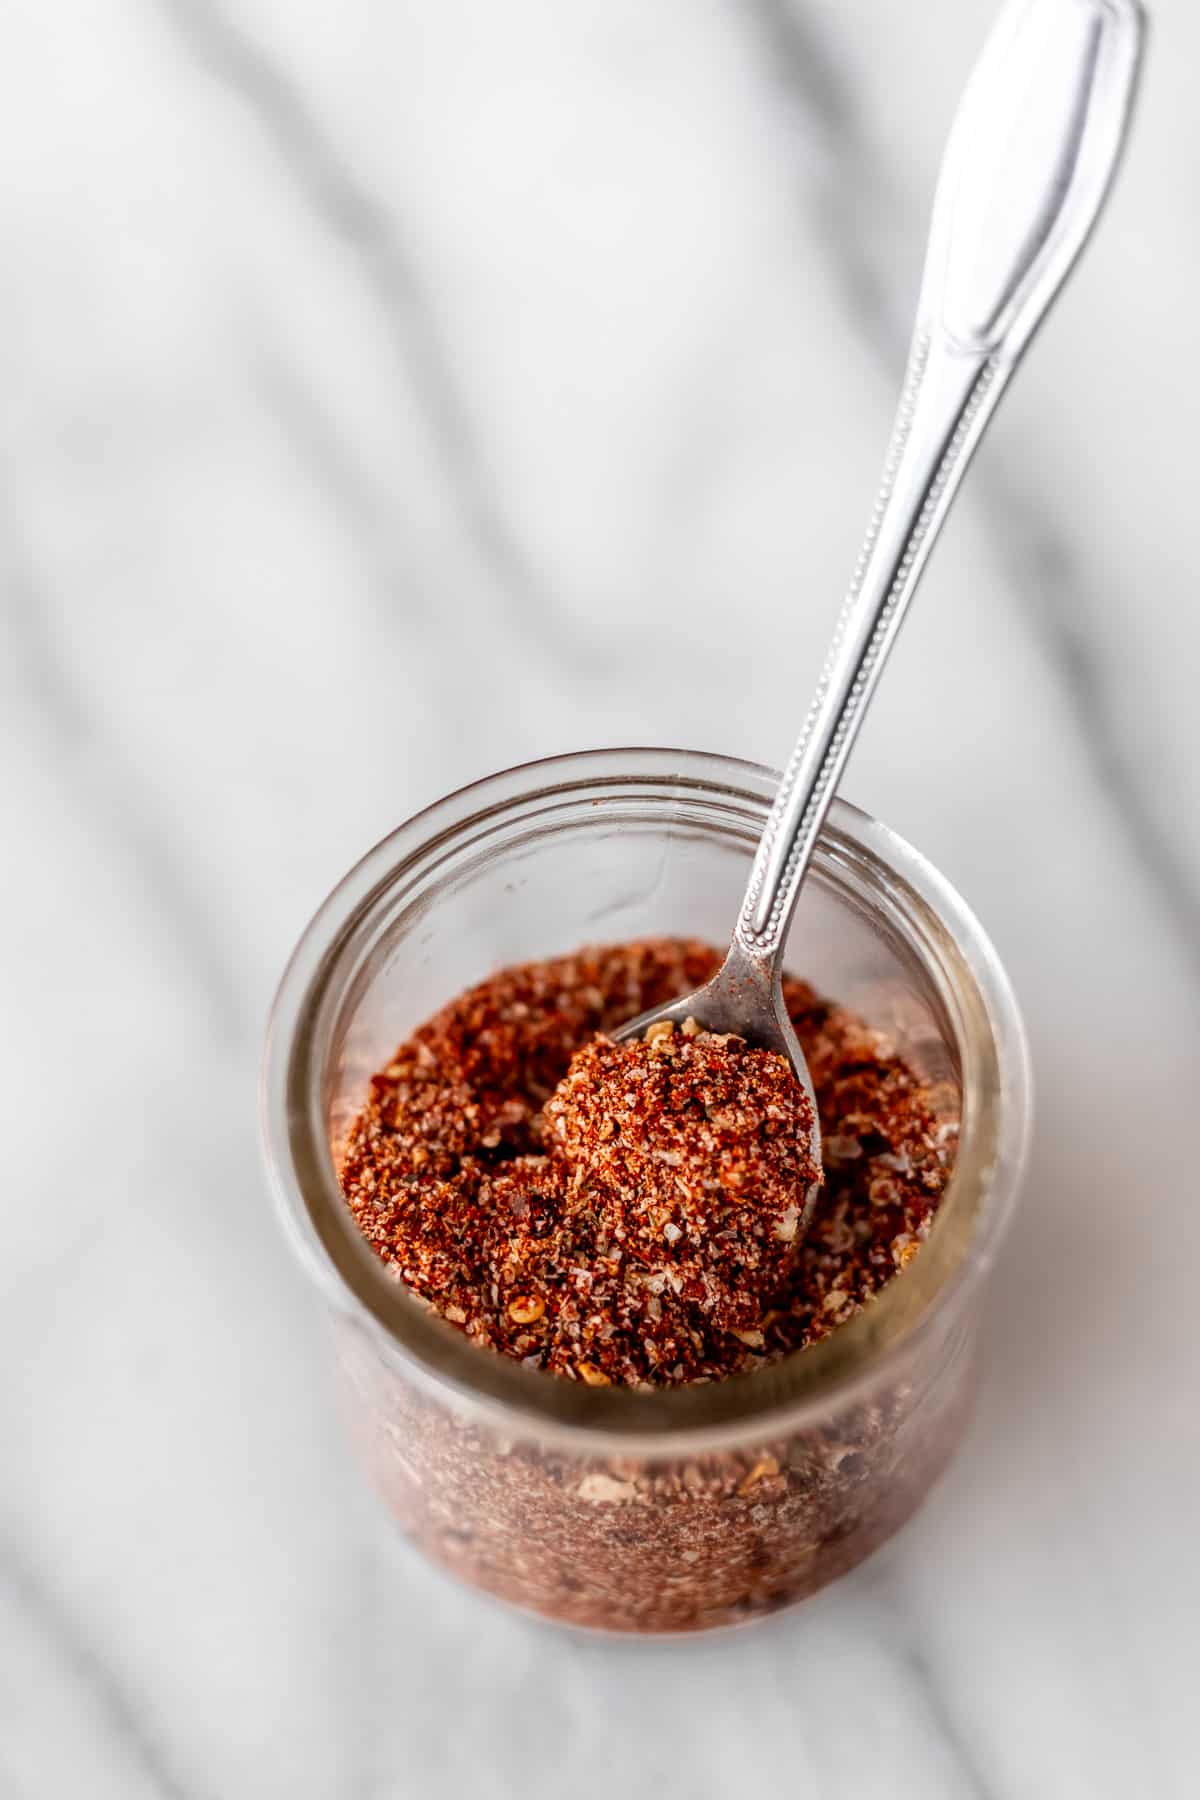 Homemade Montreal steak seasoning in a small glass jar with a small spoon in it on a marble background.